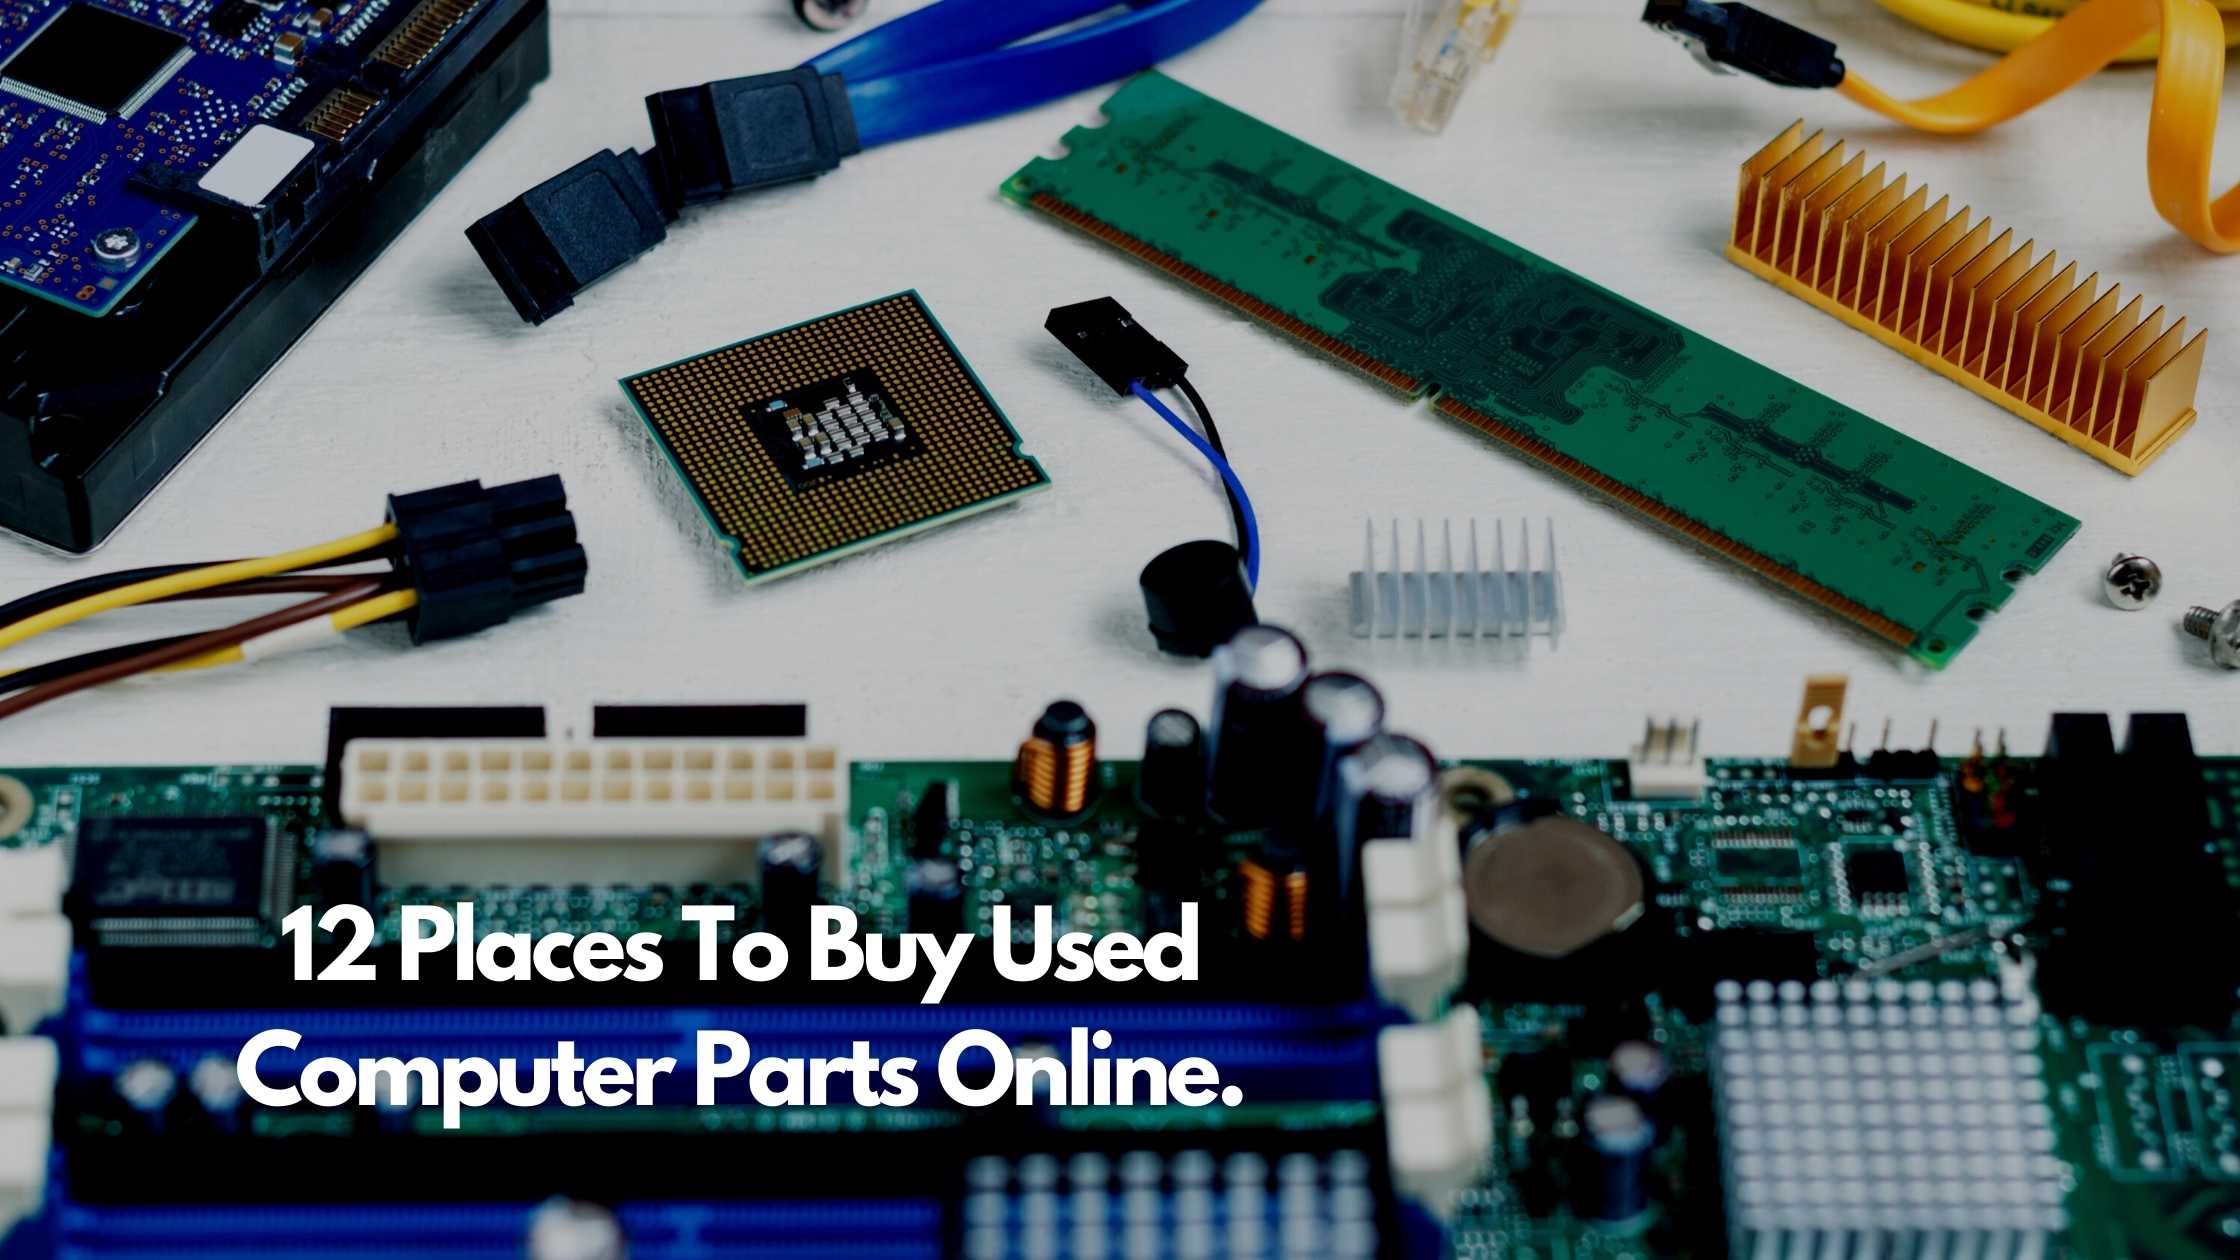 12 Places To Buy Used Computer Parts Online